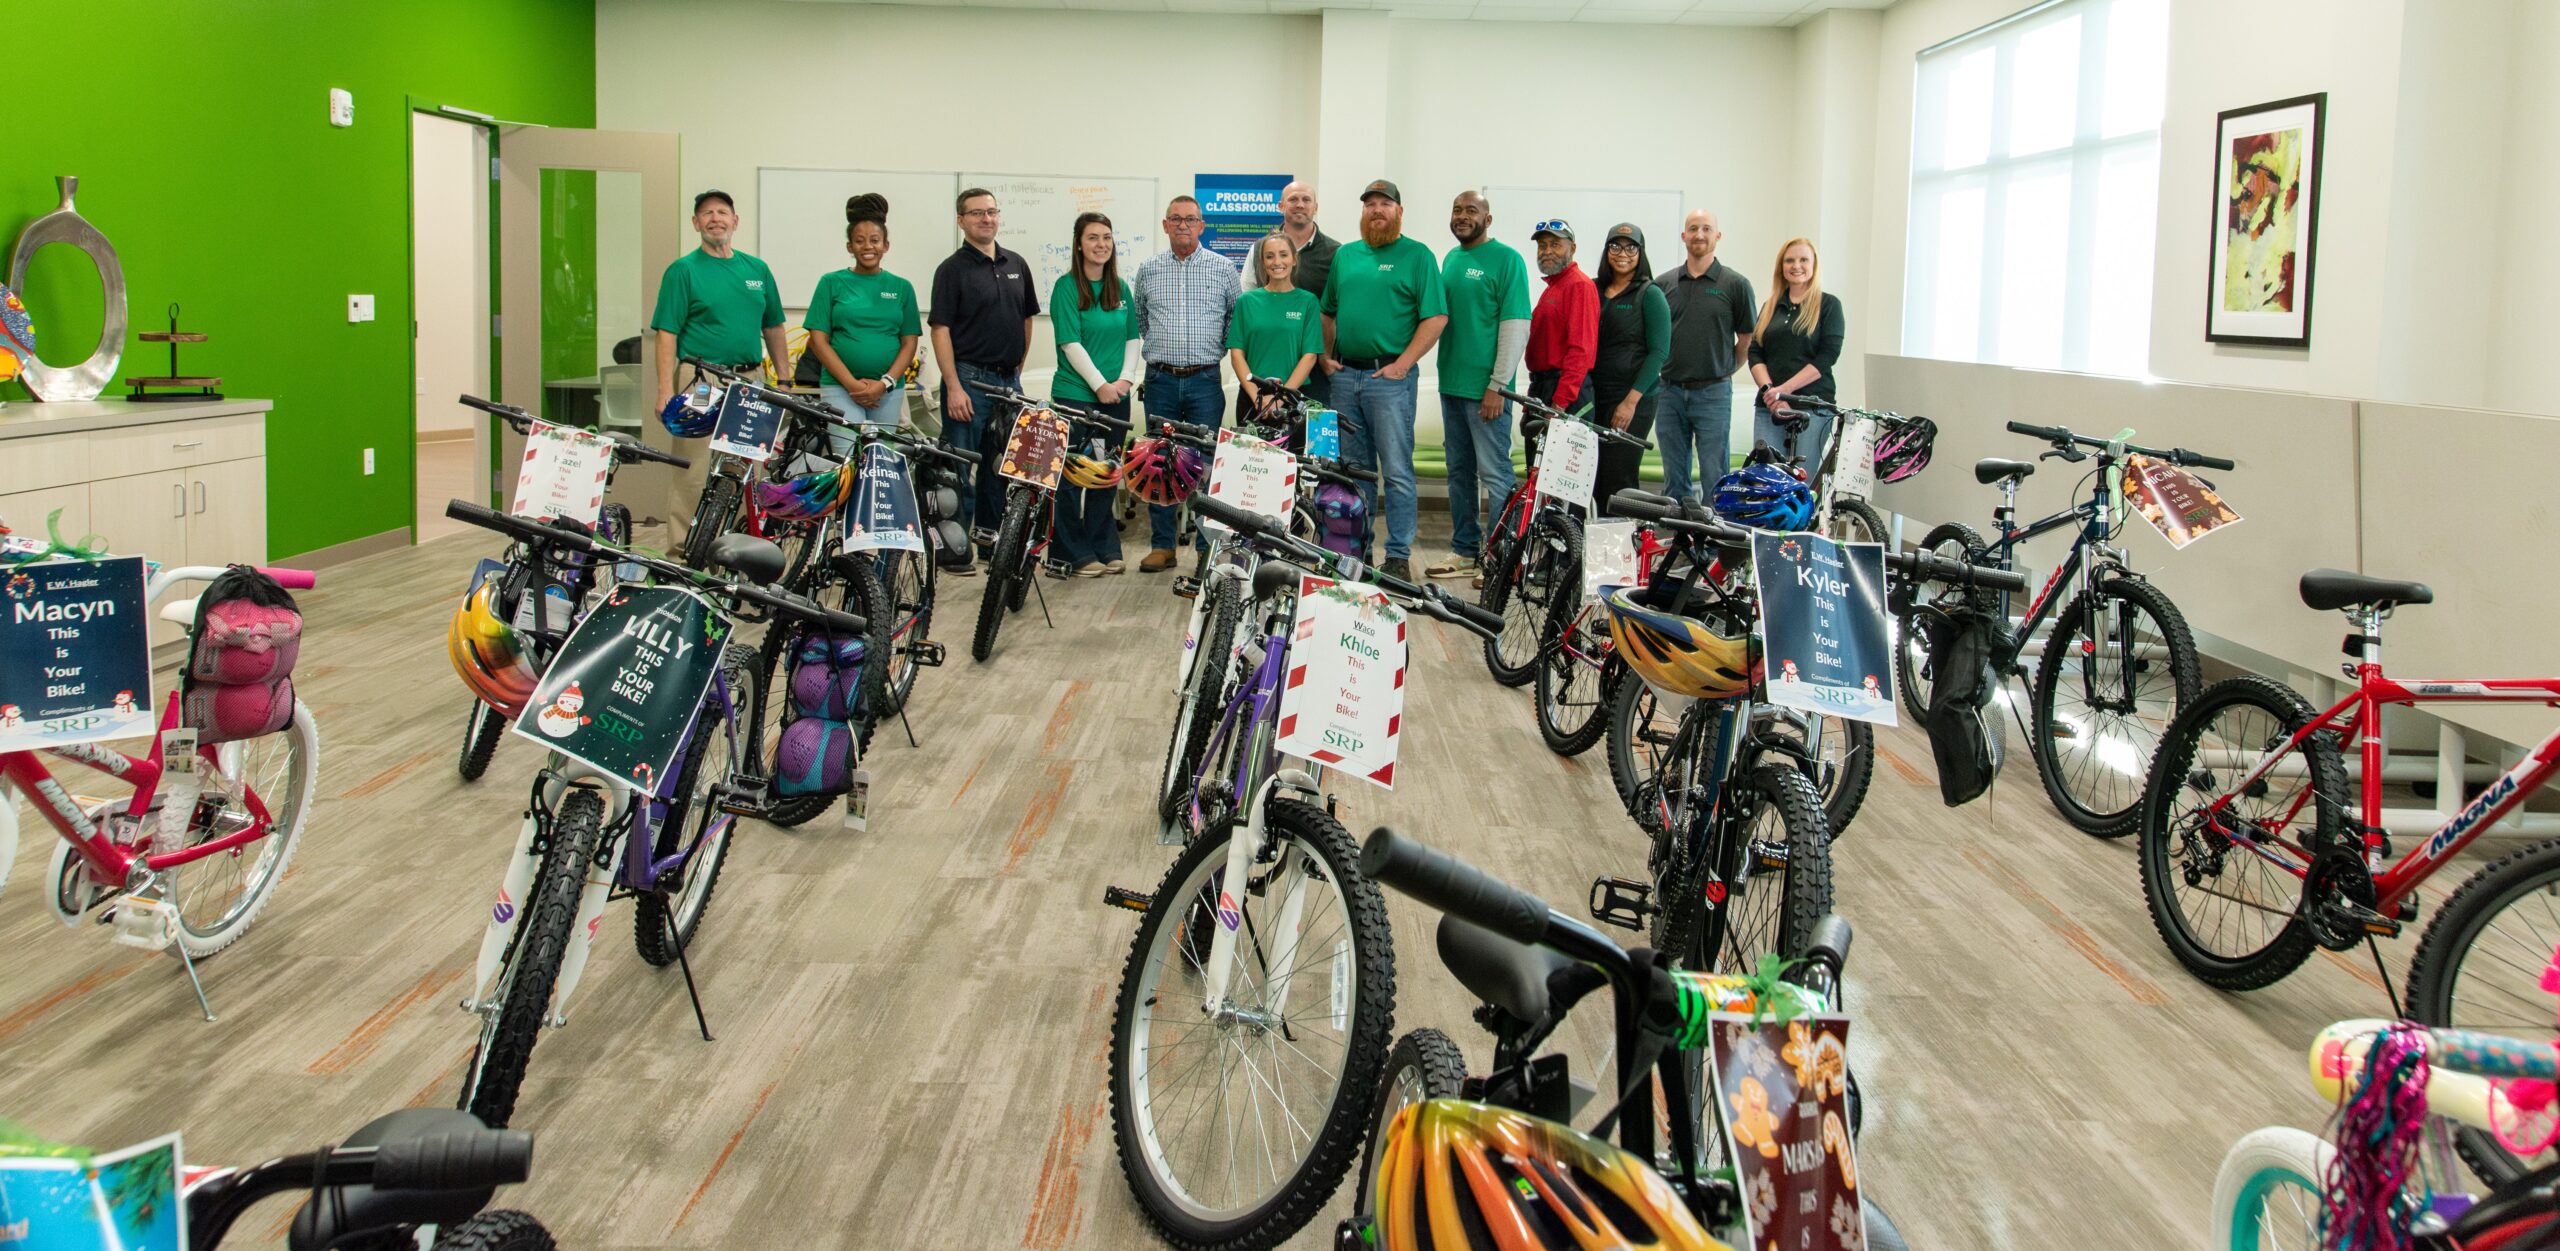 SRP Spreads Holiday Cheer with Bike Donation to Boys & Girls Clubs of Greater Augusta